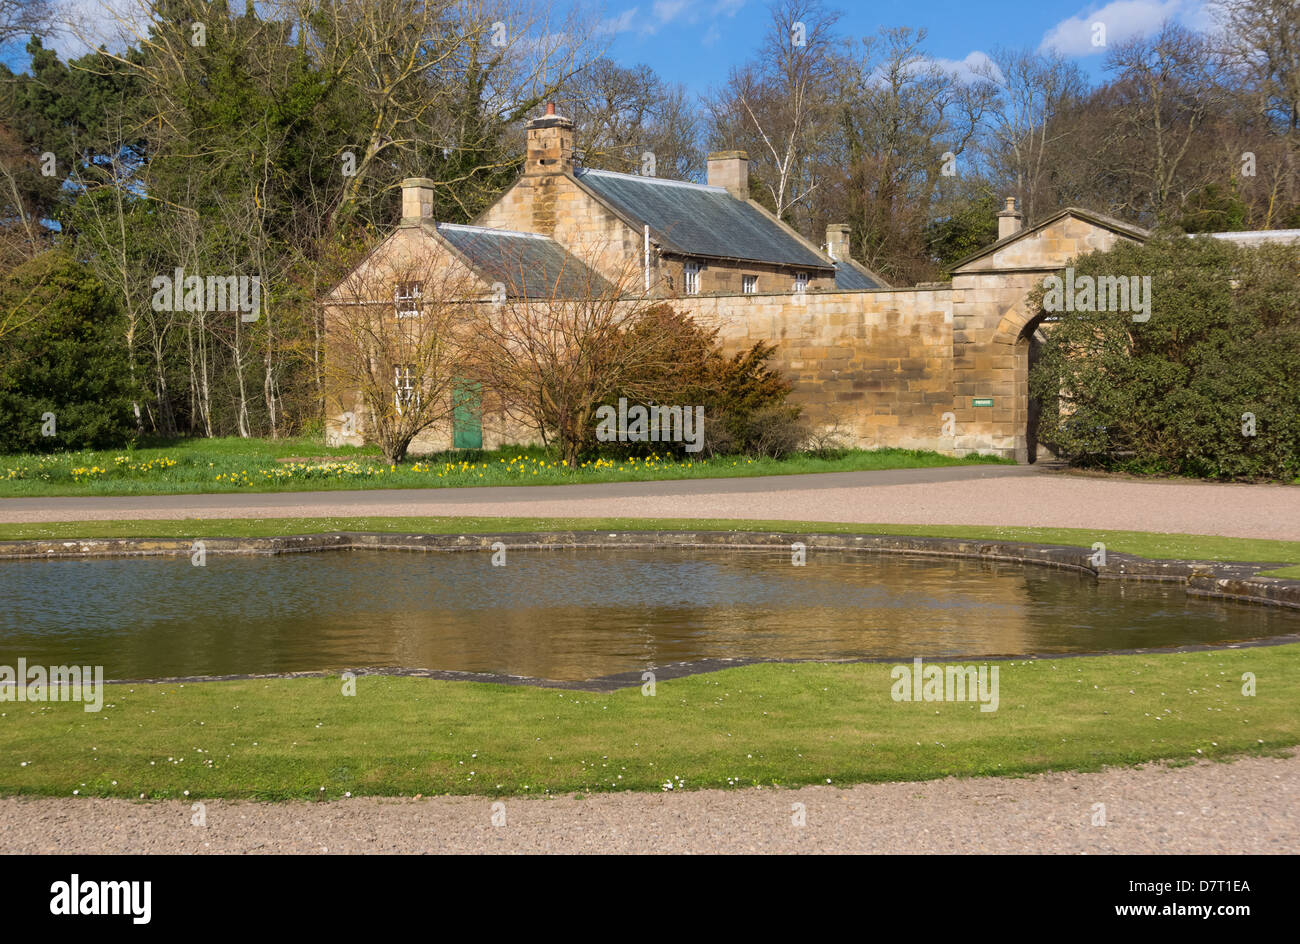 Howick Hall in Northumberland, the home of Earl Grey. Stock Photo